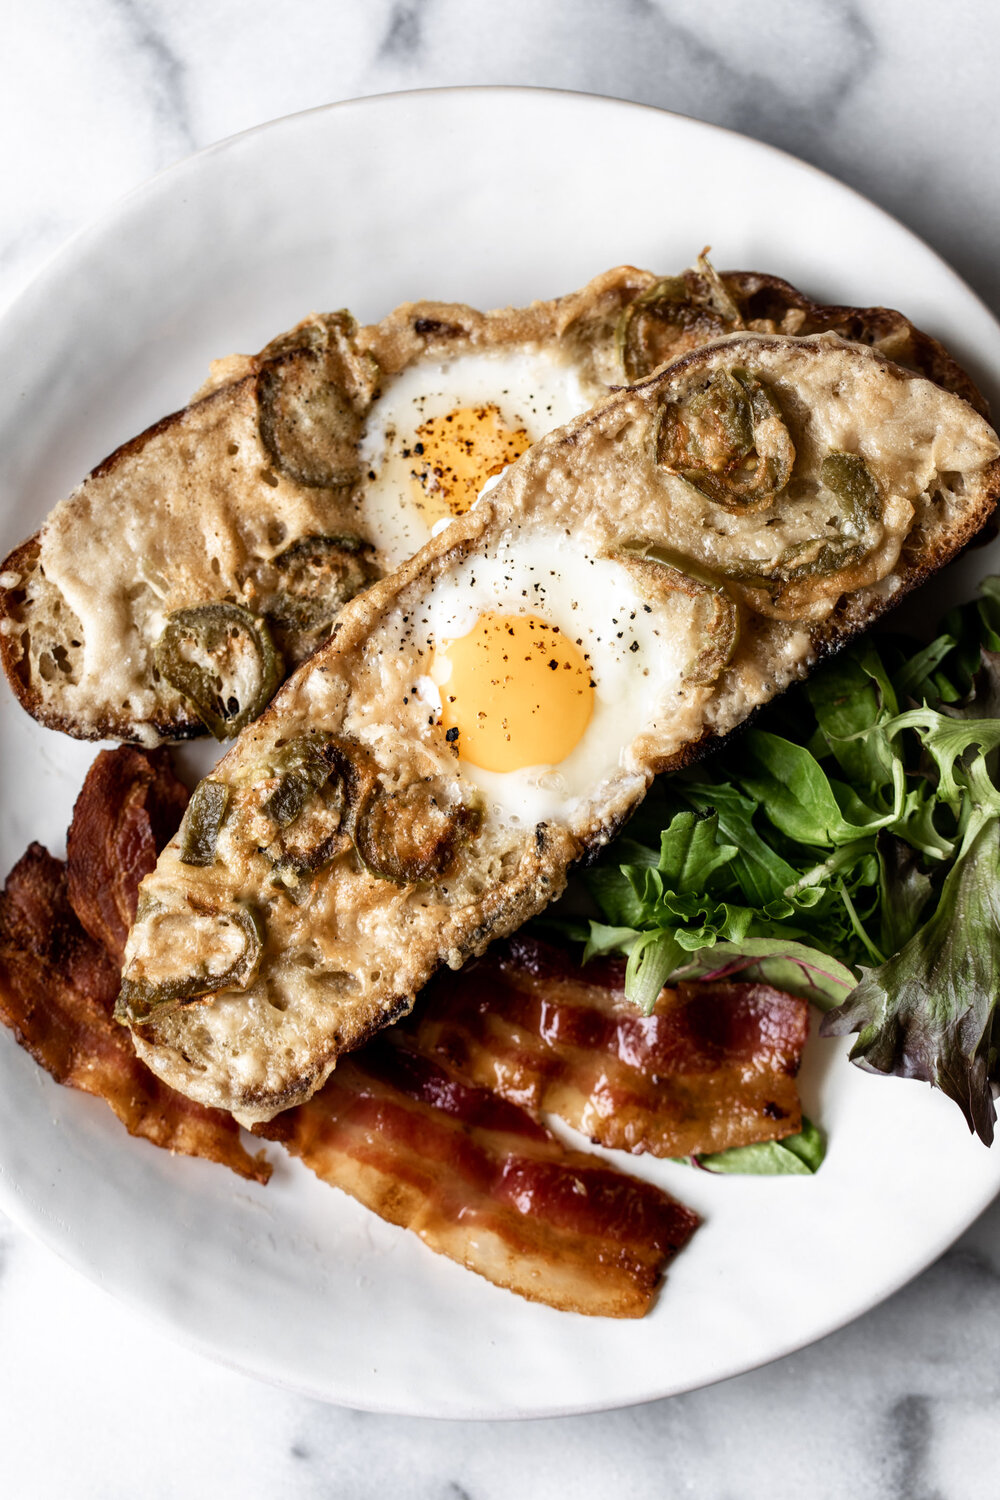 Classic egg in a hole toast gets and upgrade with a Parmesan and pickled jalapeño crust in this easy breakfast recipe. 